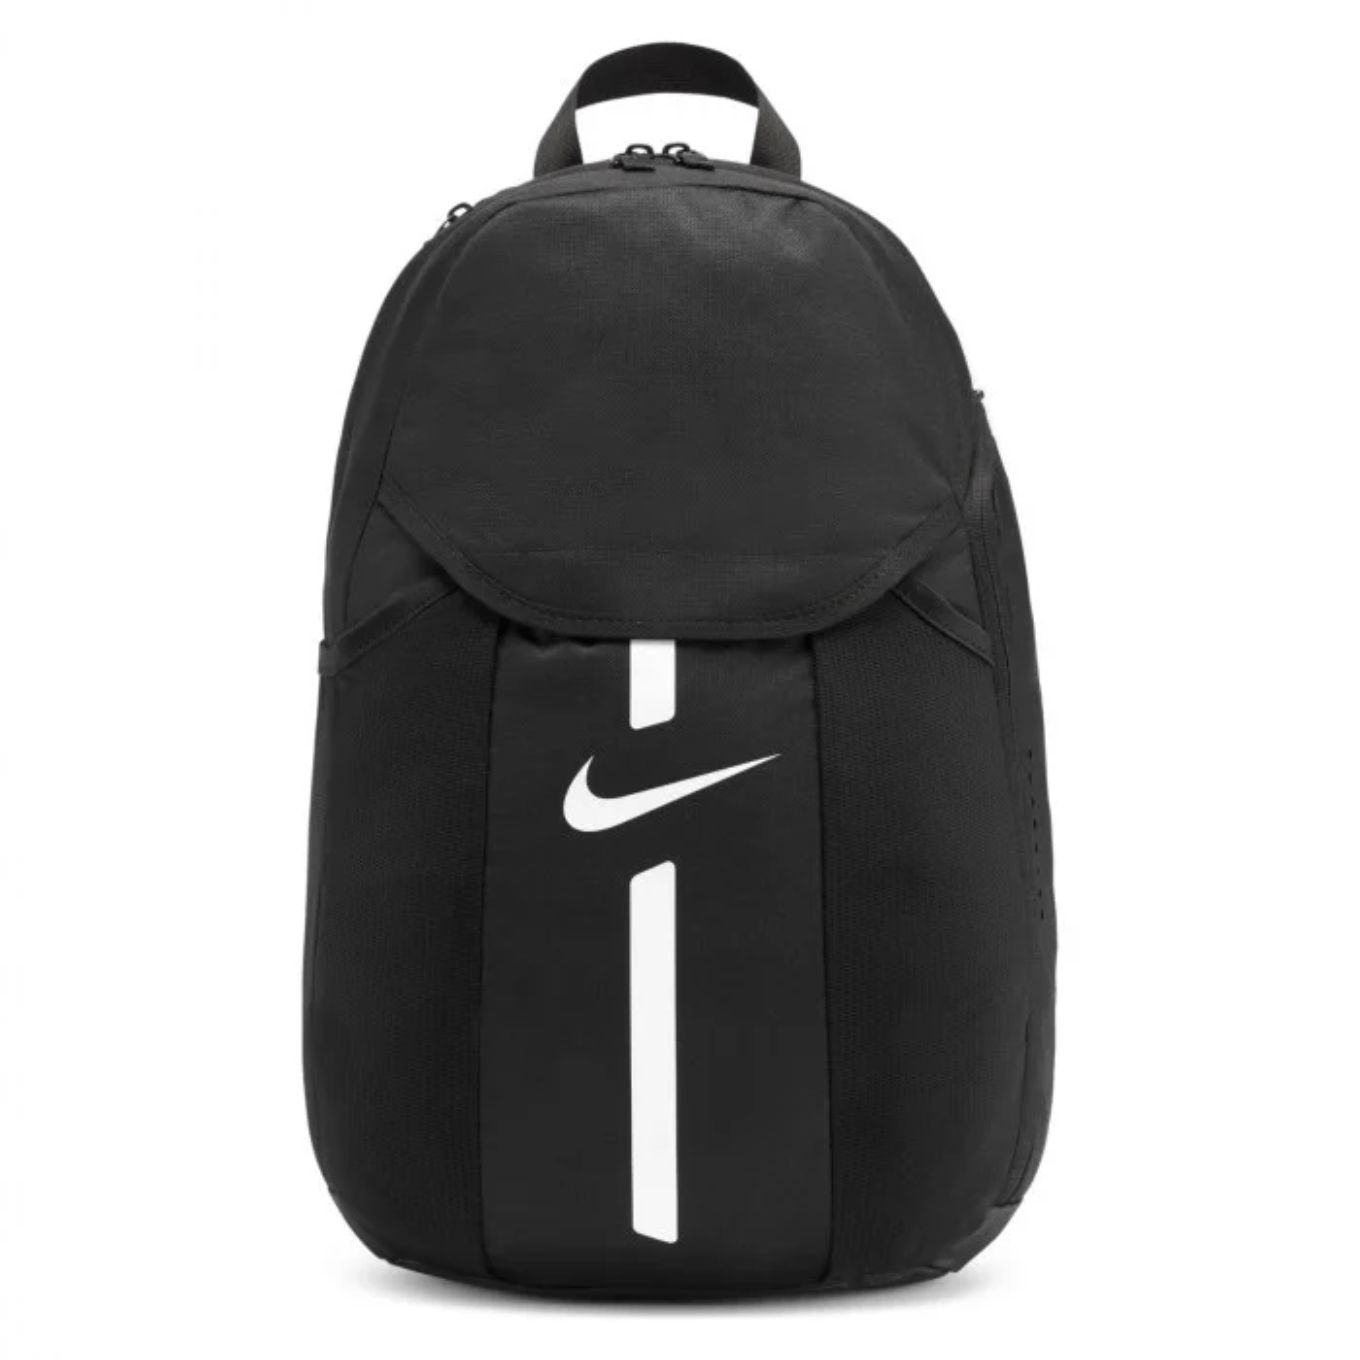 Atletico Magna - Academy Backpack